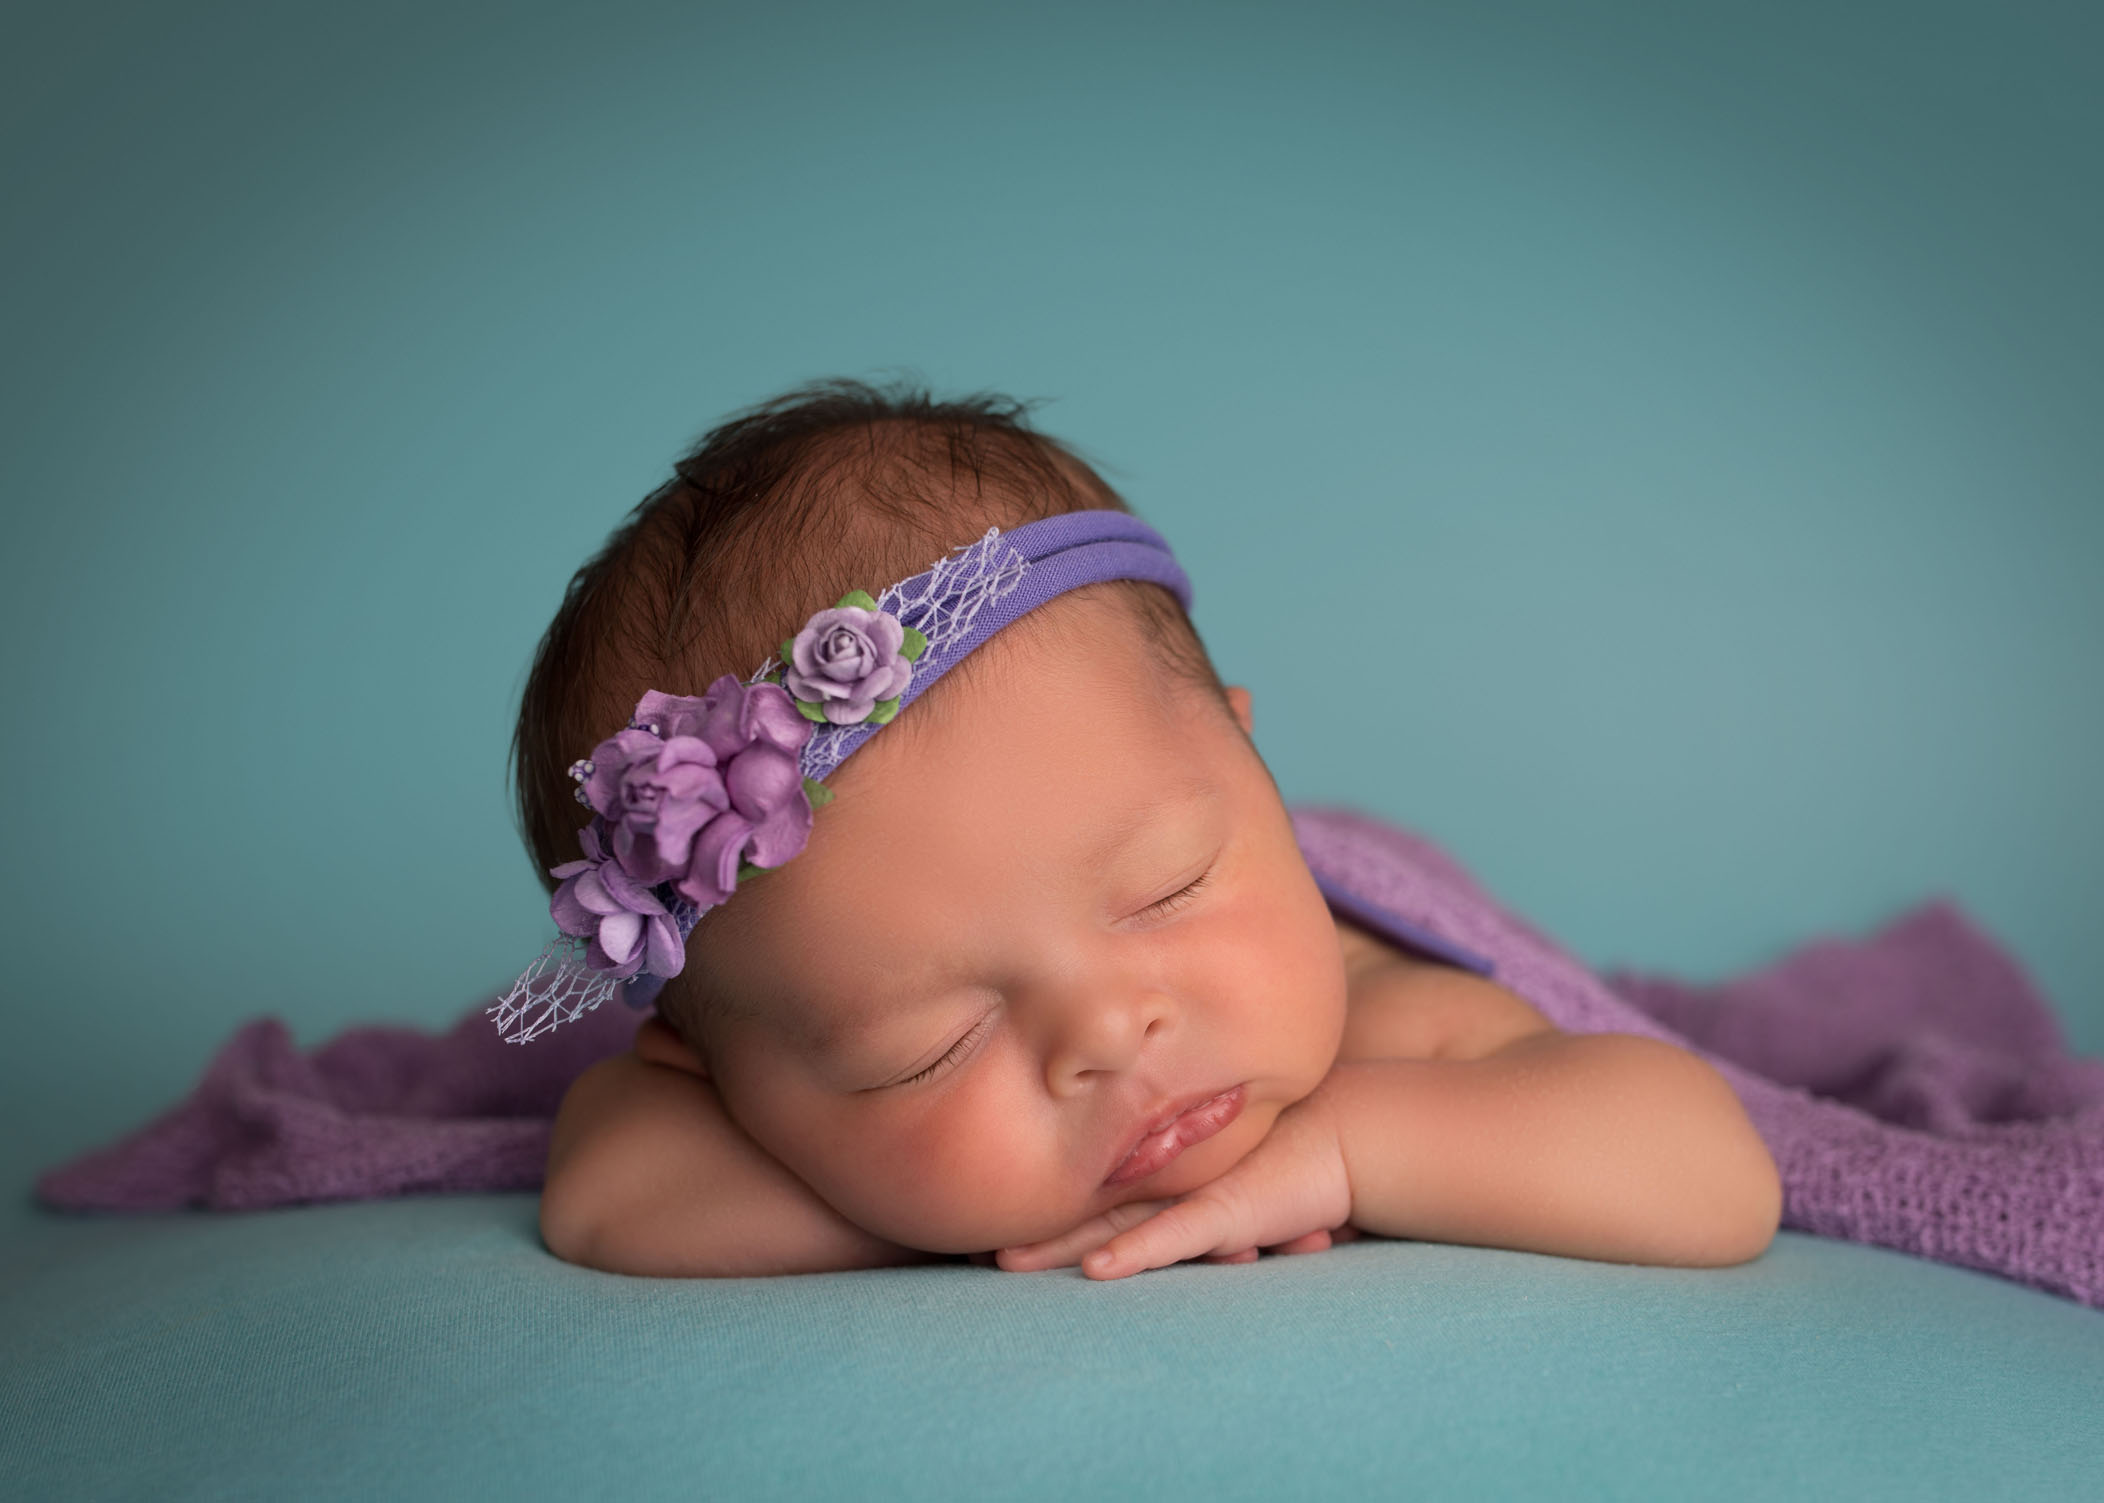 newborn baby girl sleeping with her head on her arms on teal blue with light purple headband